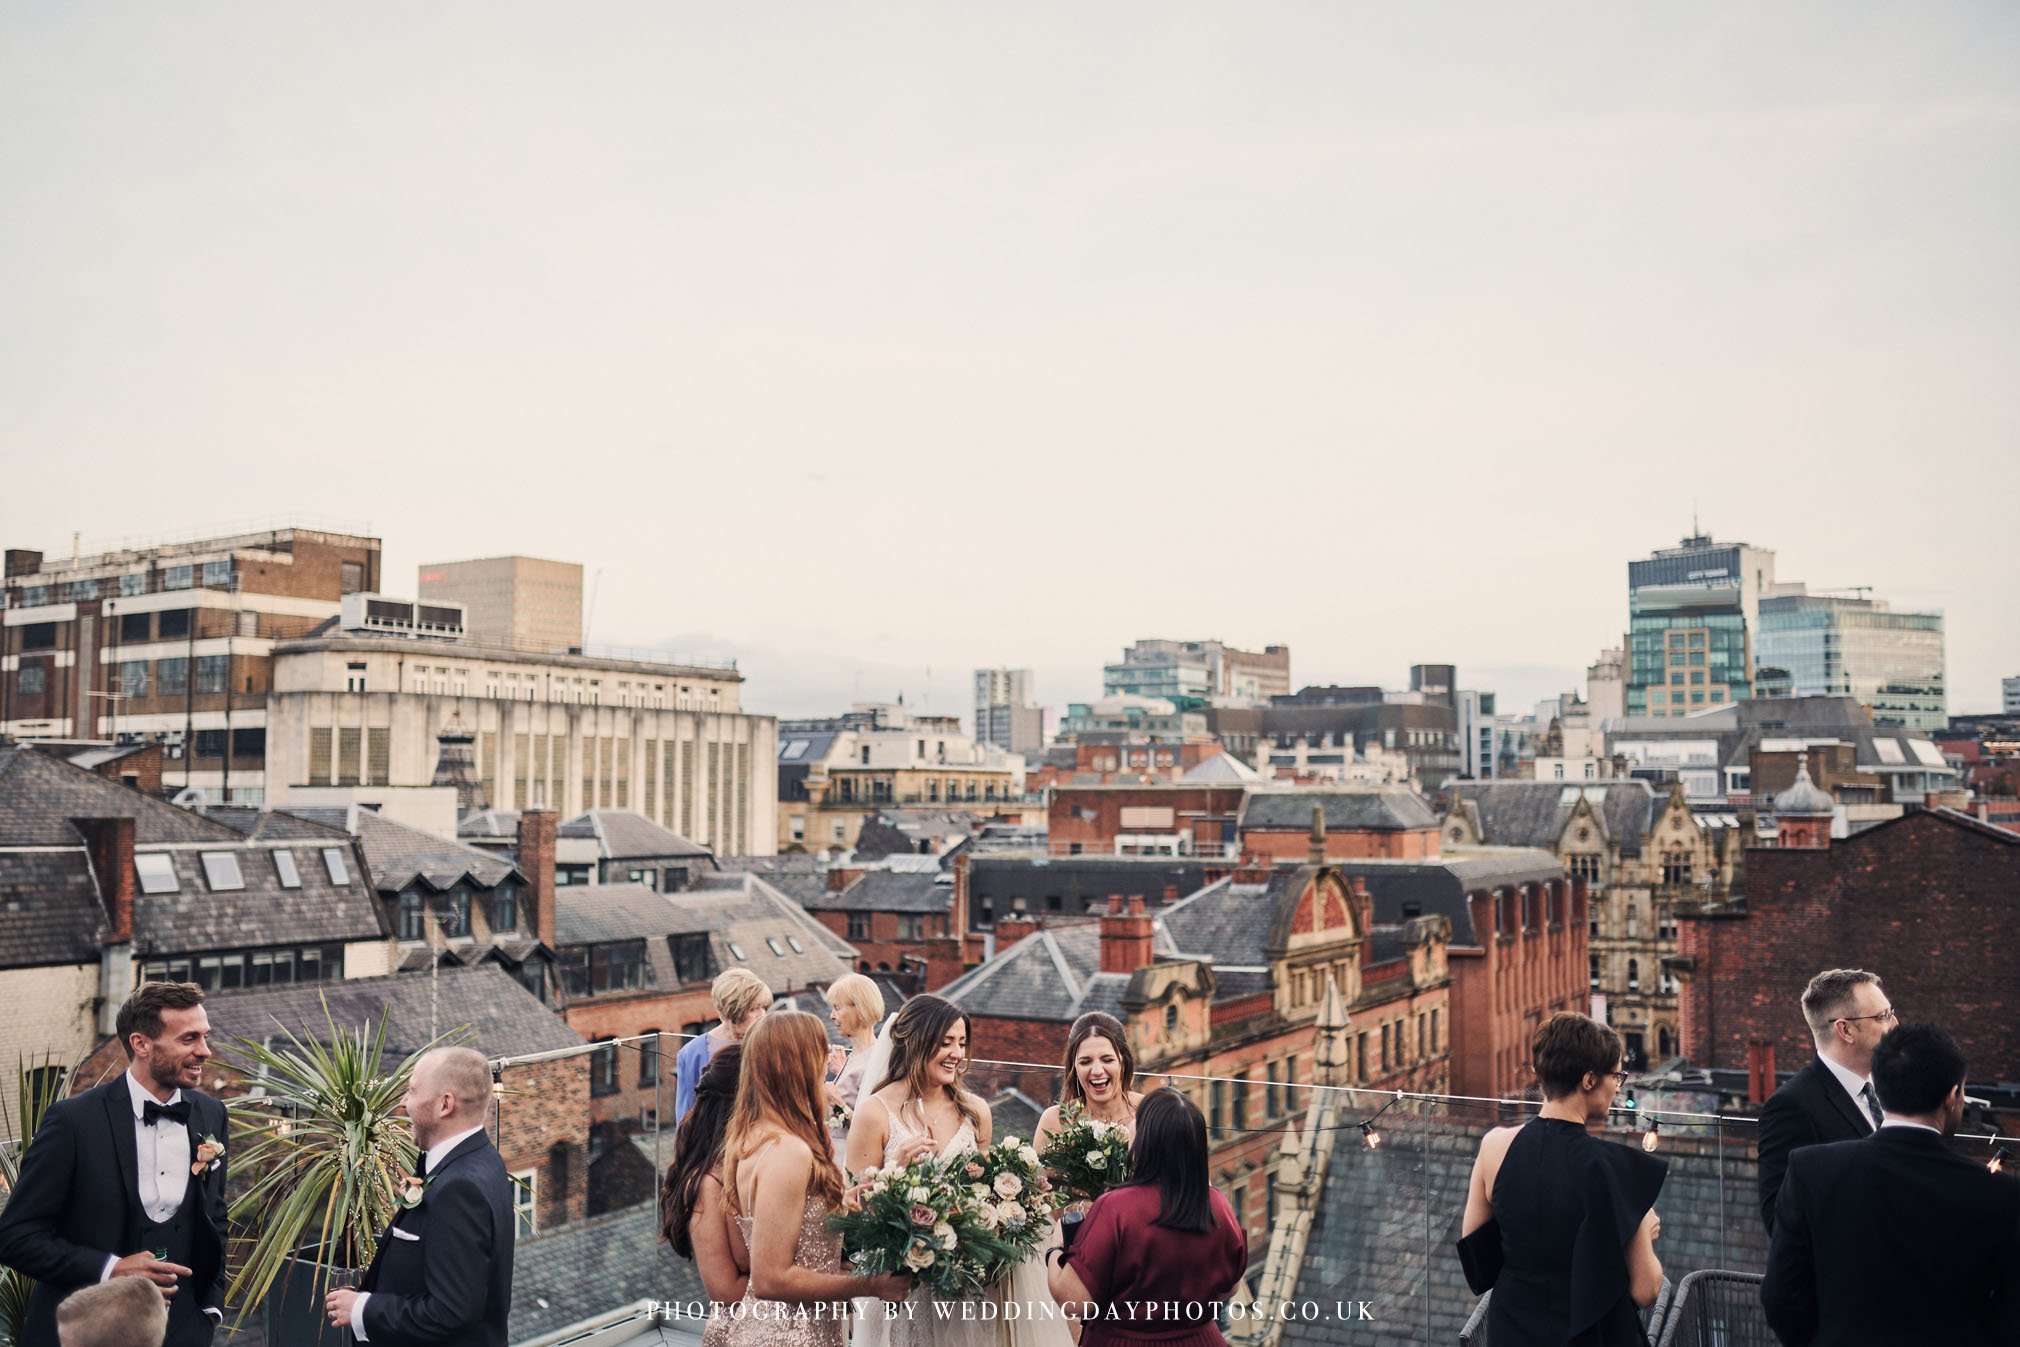 wedding guests enjoying the outdoor space on manchester hall's John Rylands rooftop terrace